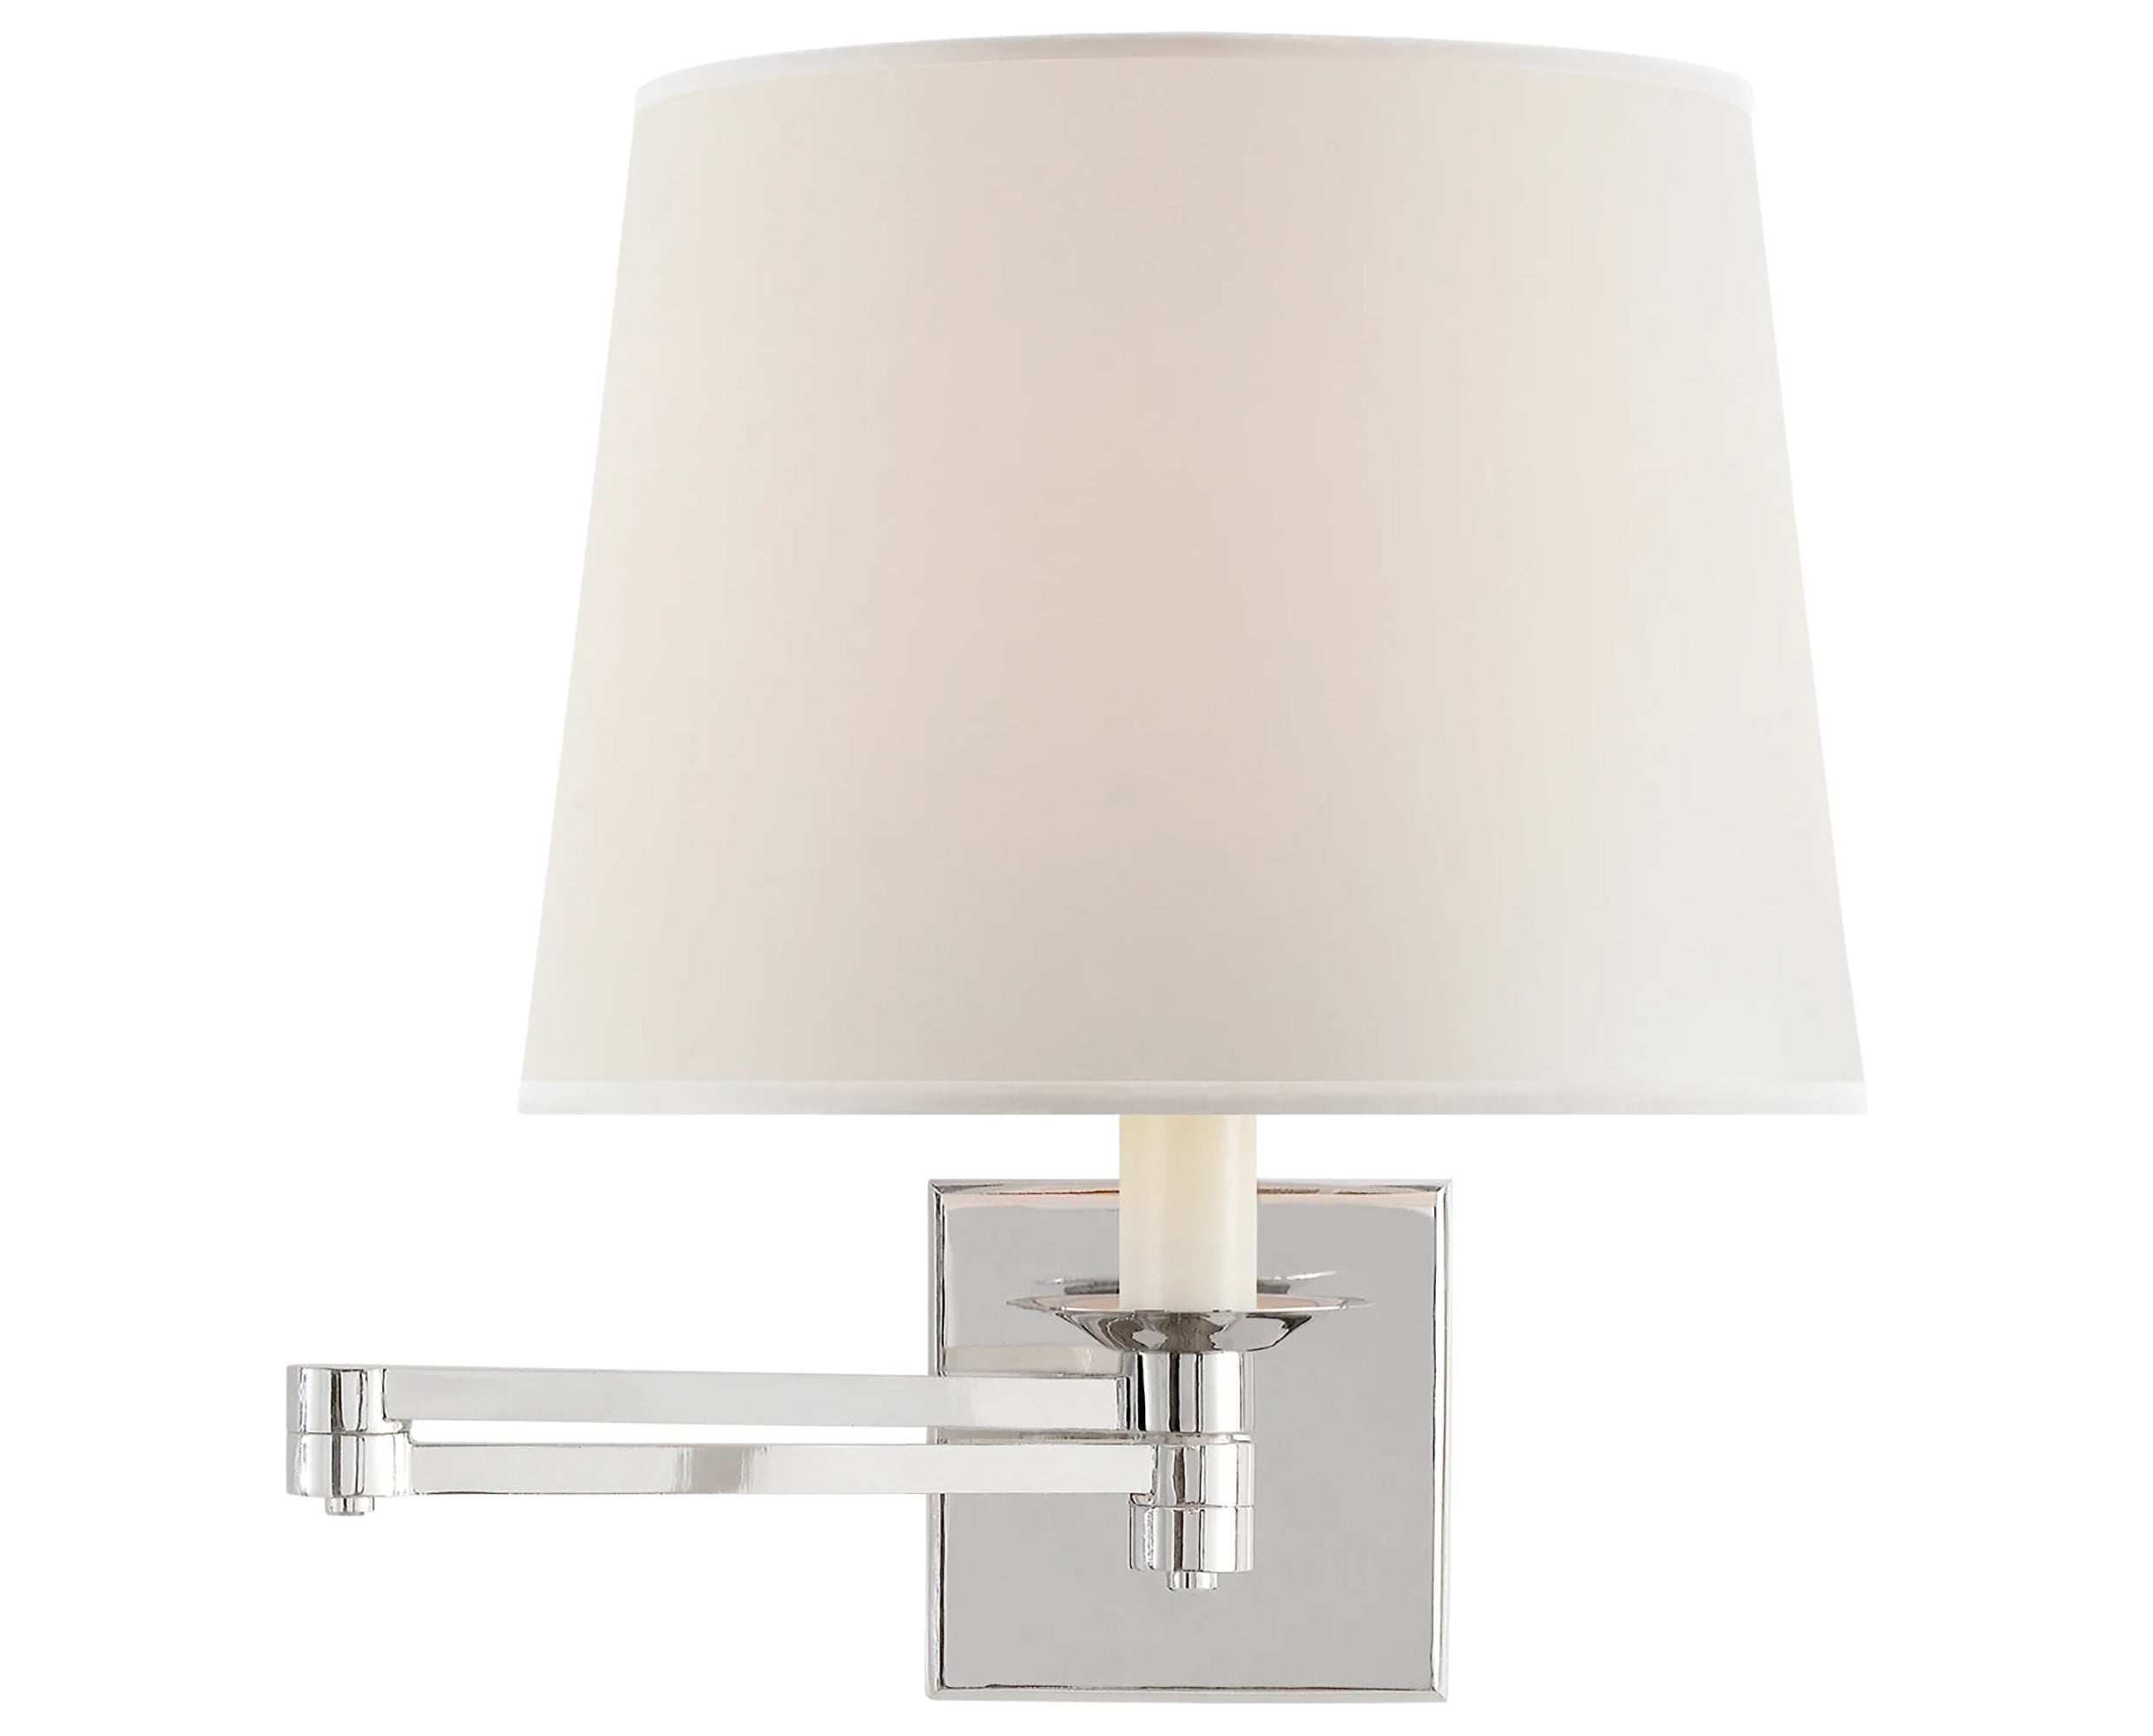 Polished Nickel & Percale Nordy | Evans Swing Arm Sconce | Valley Ridge Furniture